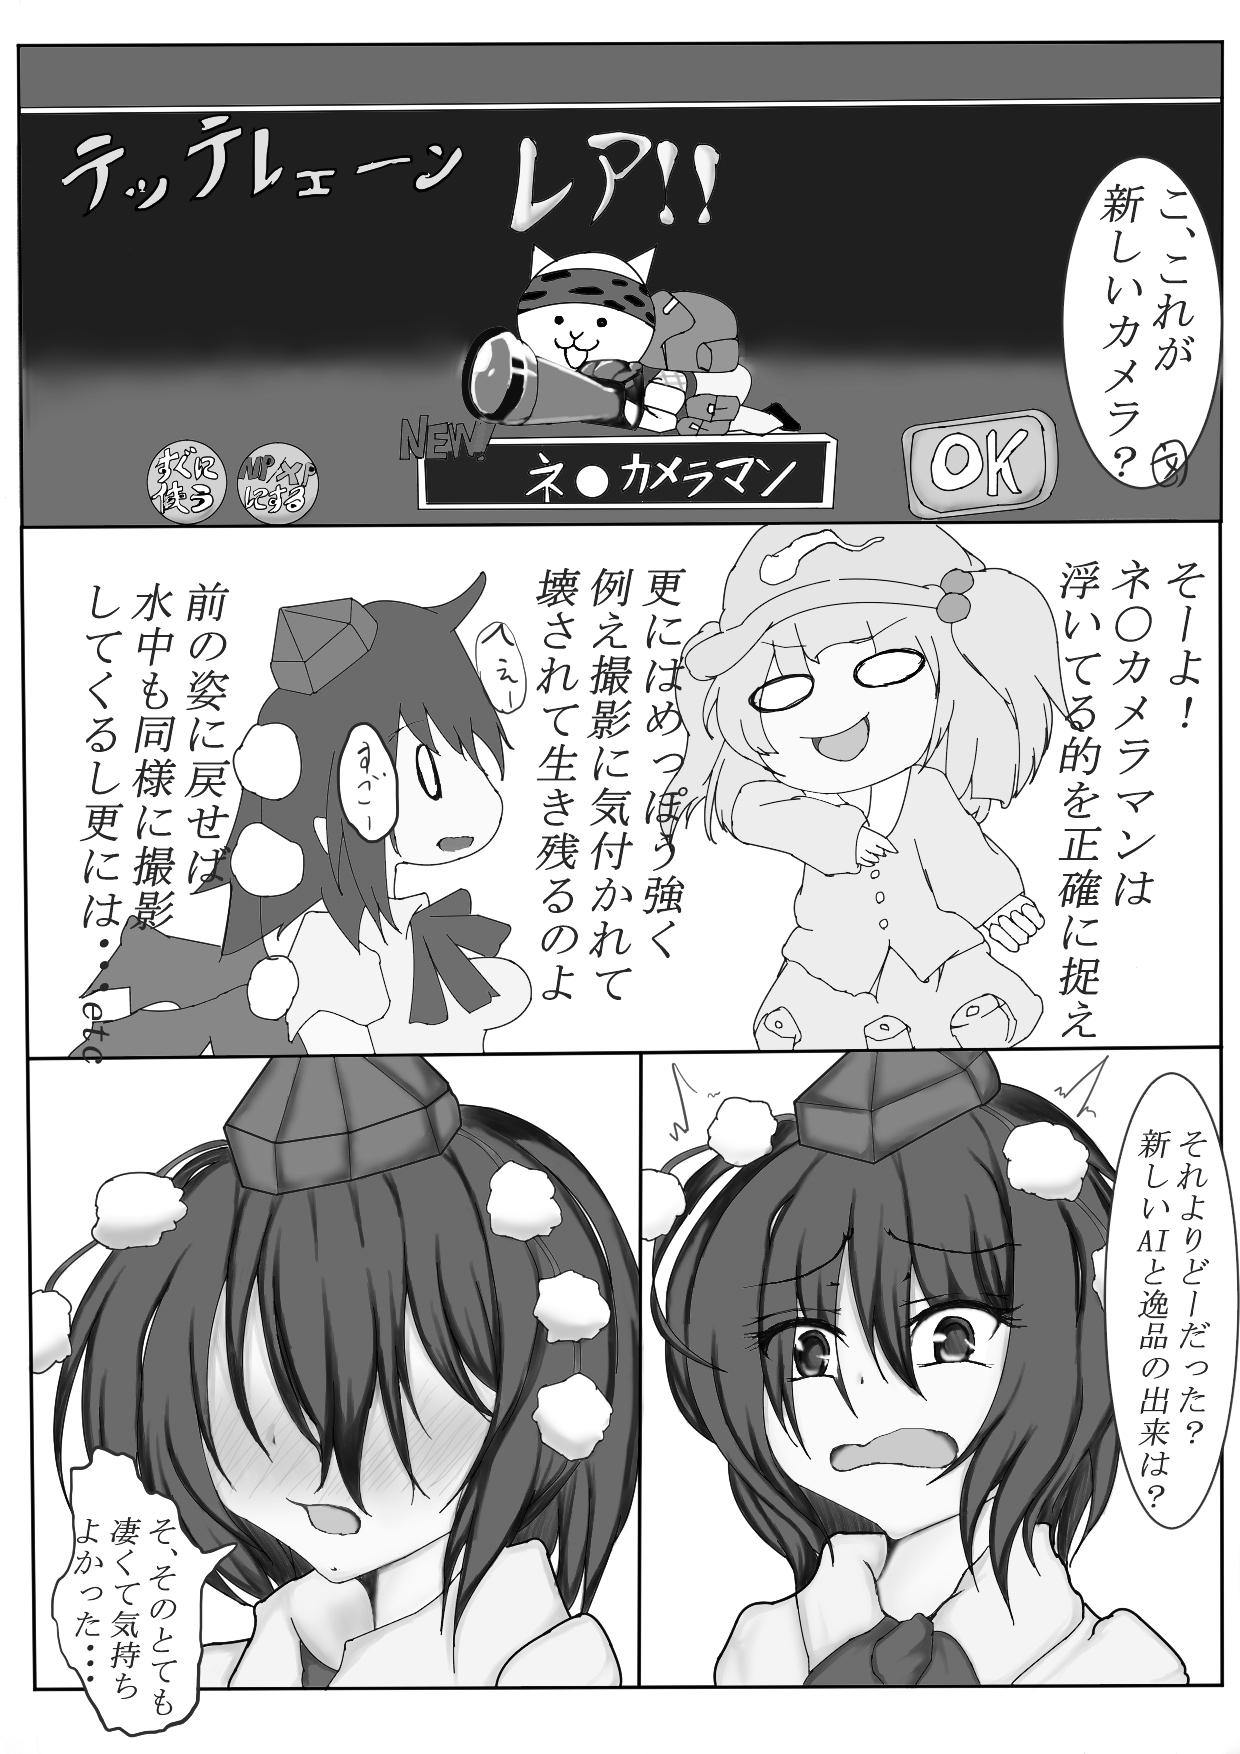 Missionary Position Porn 射命丸文とかっぱのくすぐり互恵録 - Touhou project 18 Year Old - Page 38